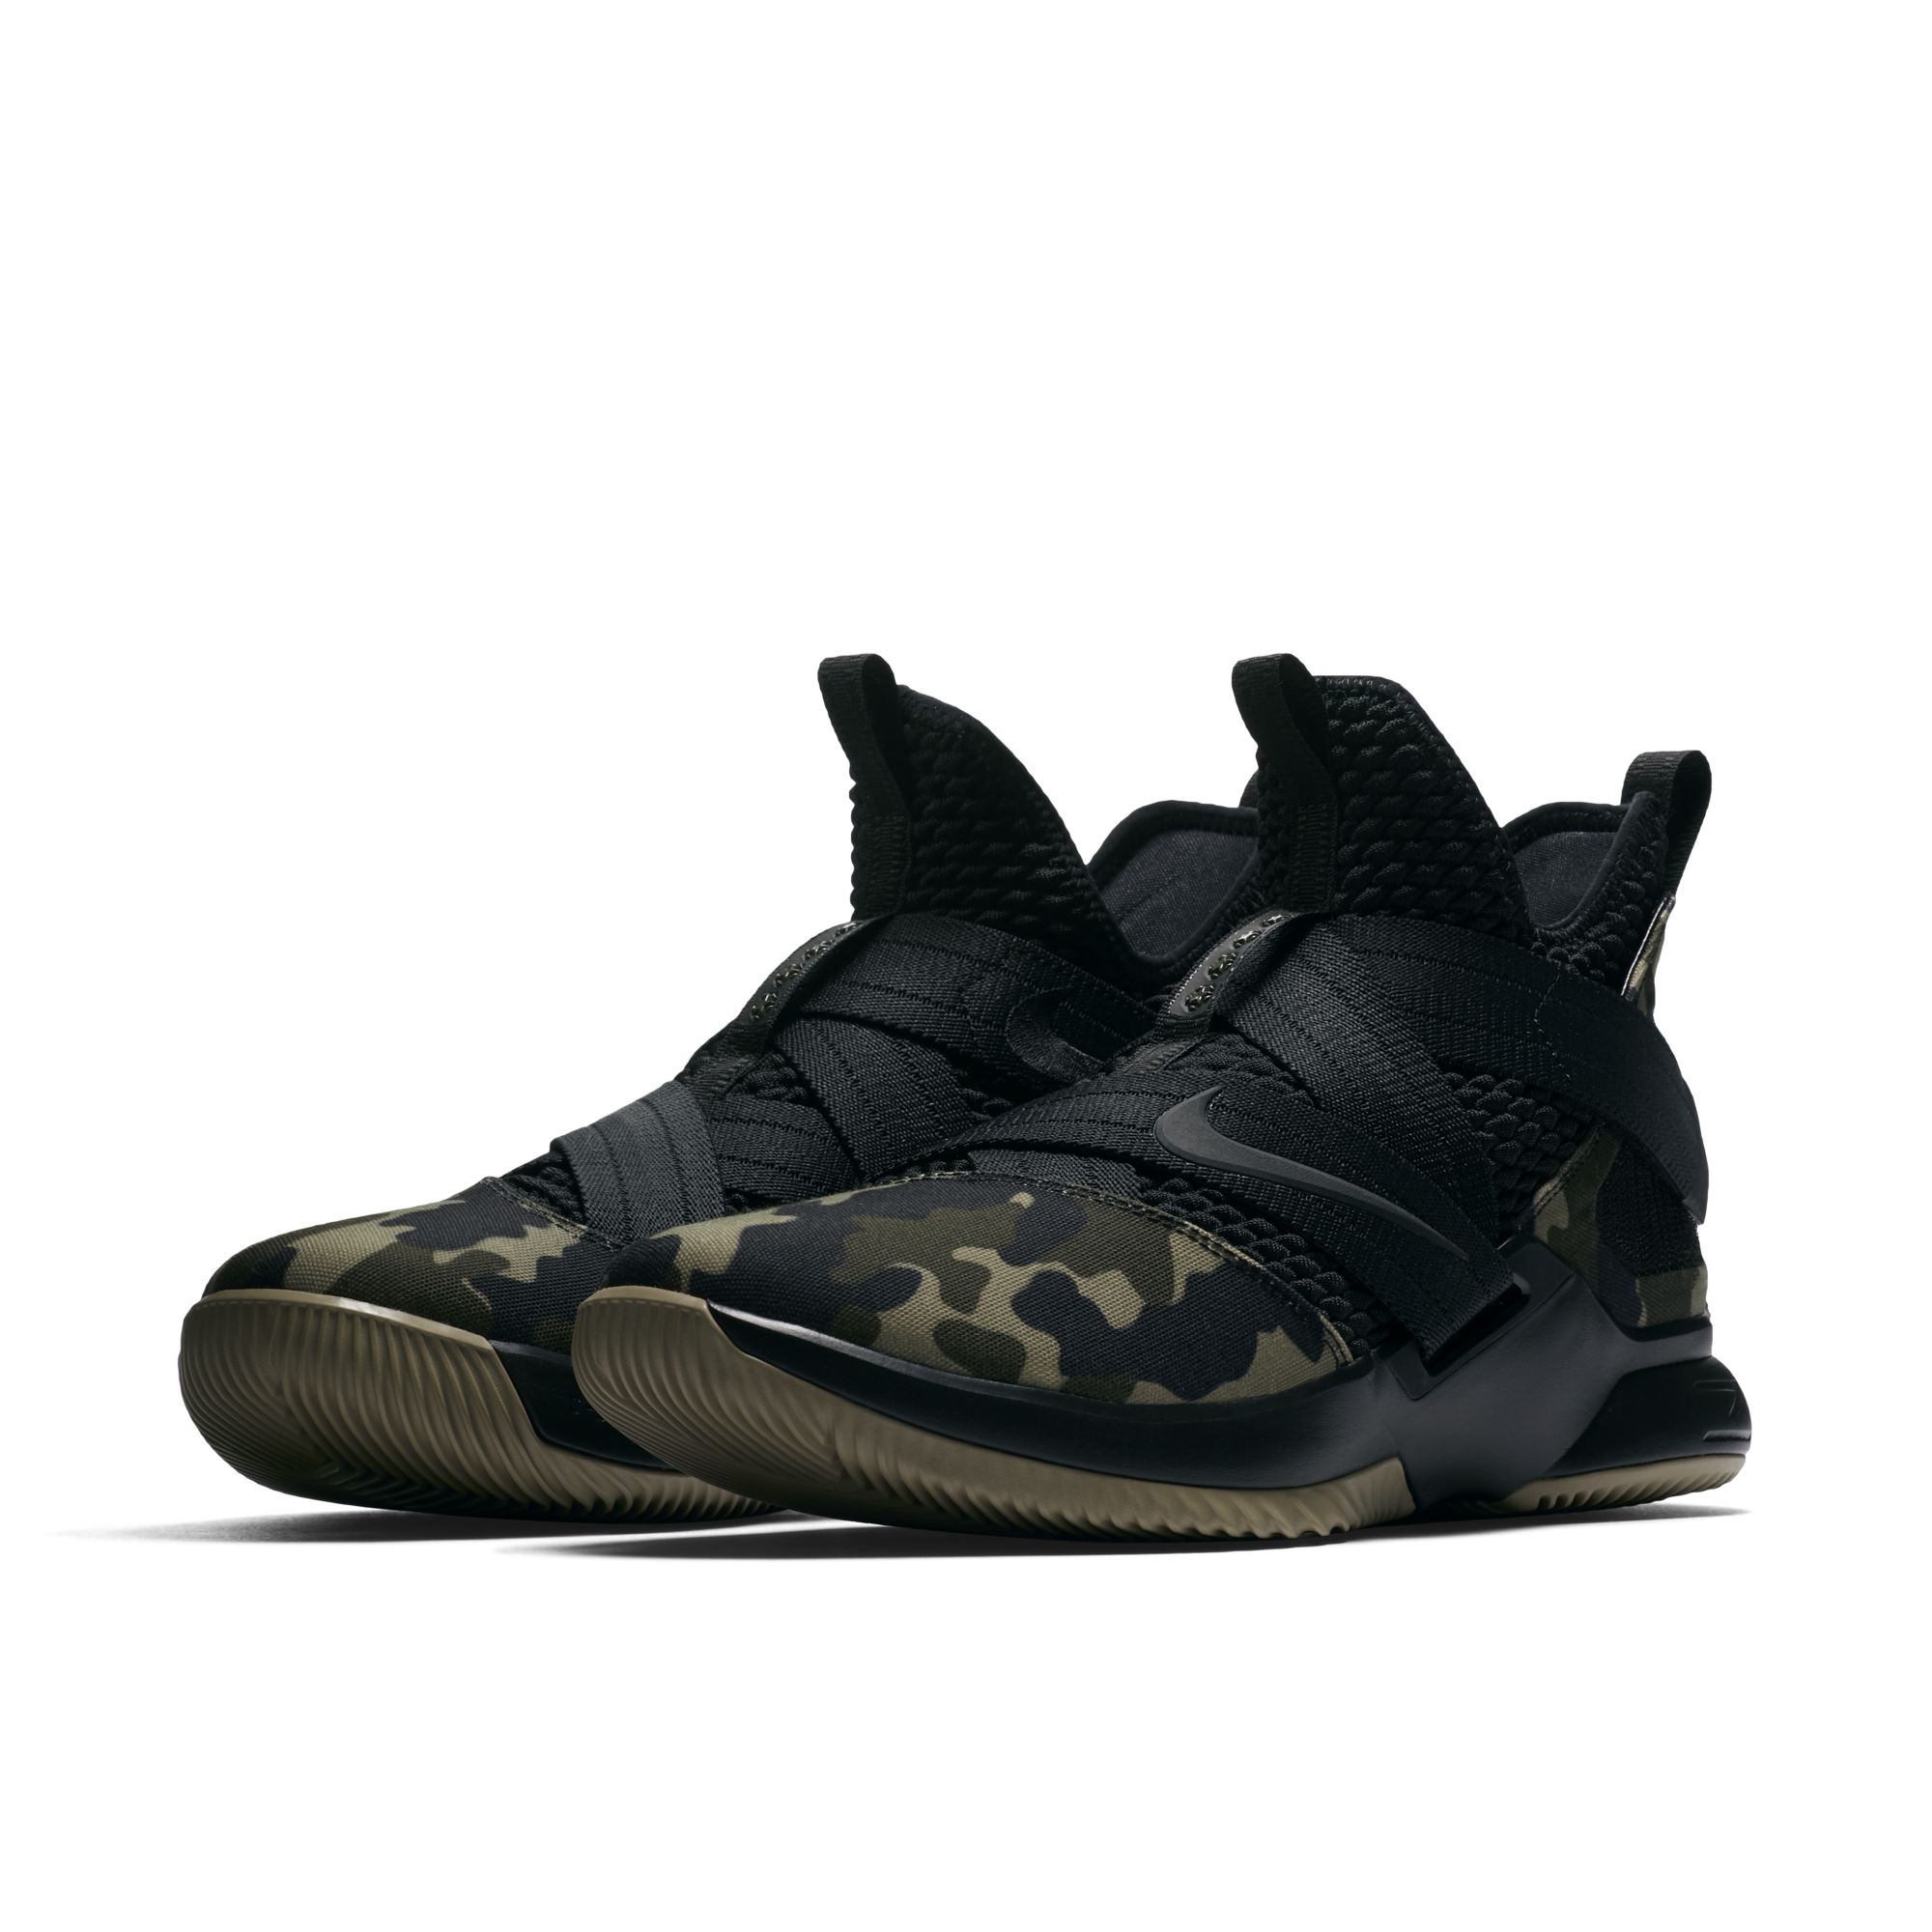 The Nike LeBron Soldier 12 'Camo' Is 